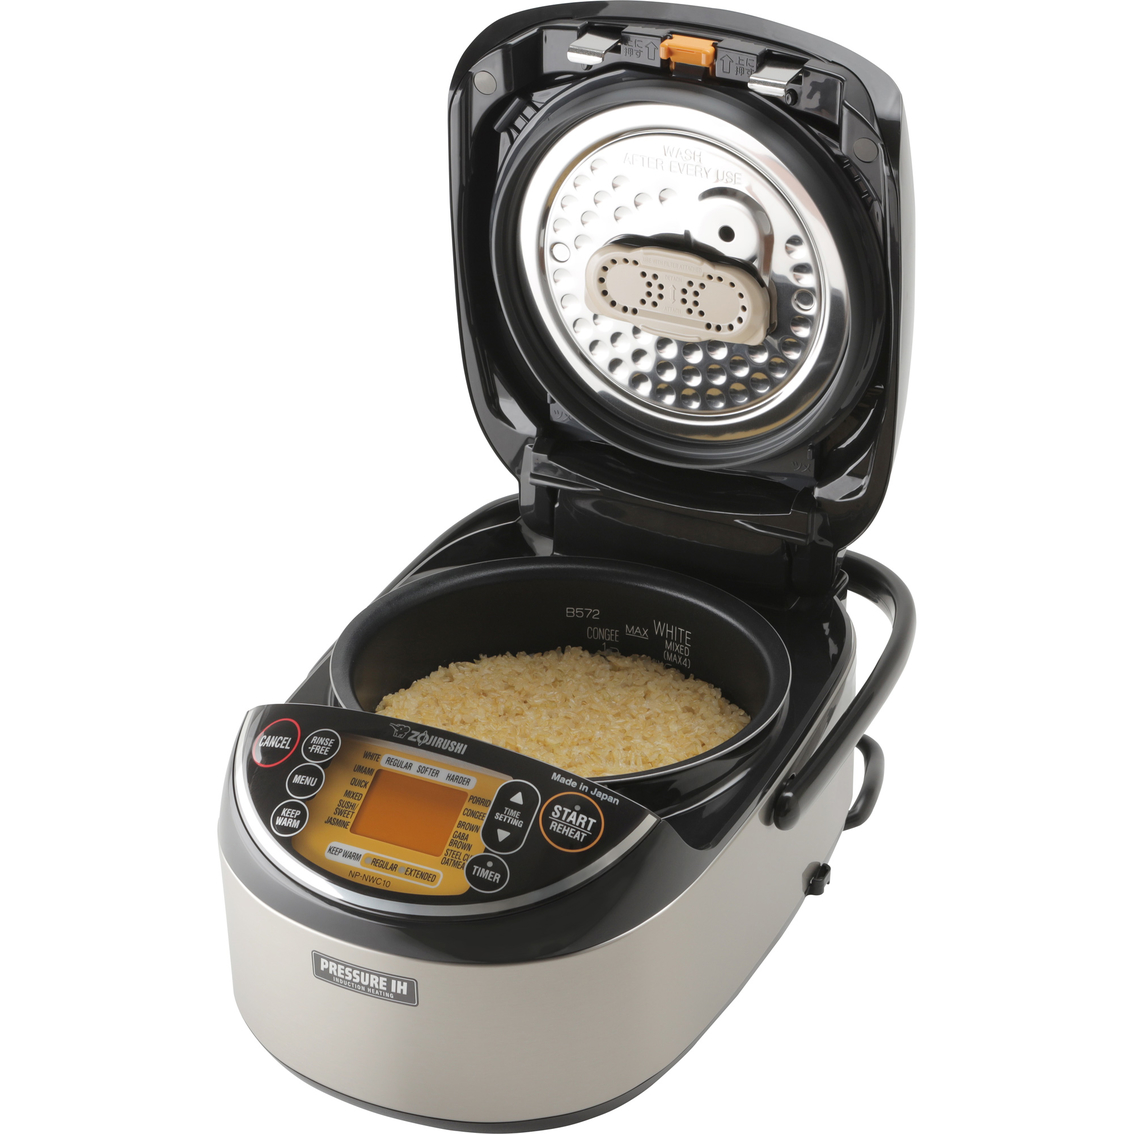 Zojirushi Pressure Induction Heating Rice Cooker and Warmer - Image 2 of 4